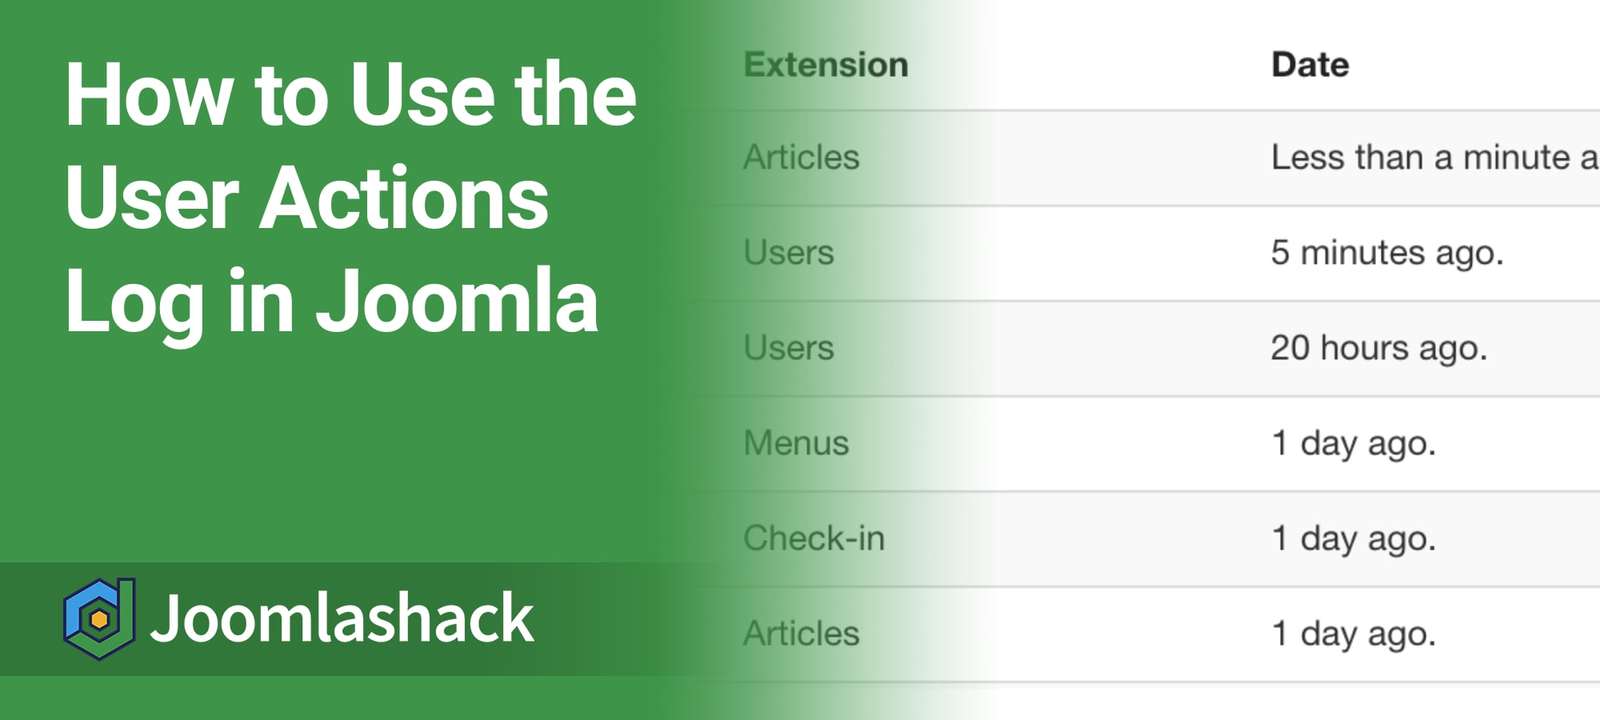 How to Use the User Actions Log in Joomla